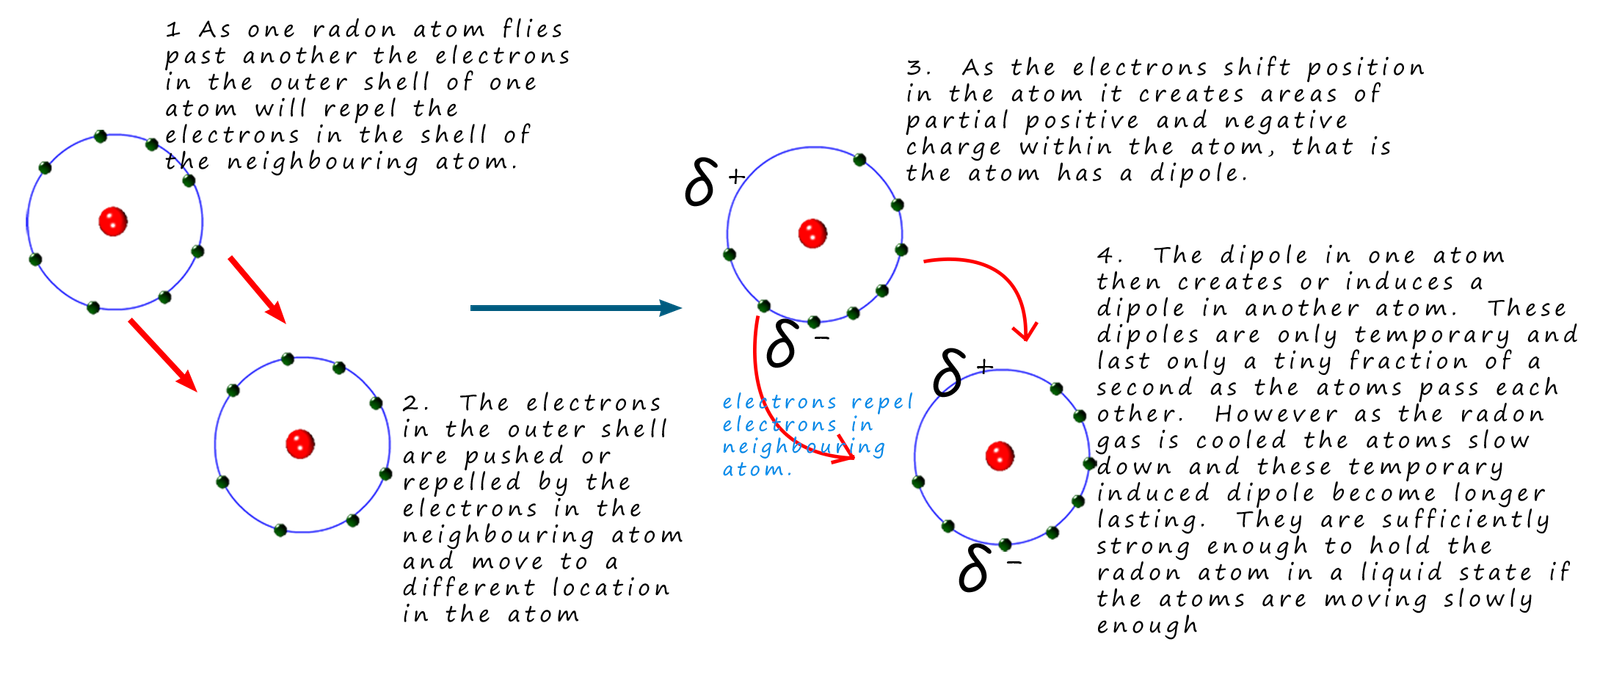 Explanation using helium atoms to explain how temporary induced dipoles are formed which leads to the formation of Van Der Waals intermolecular bonds.